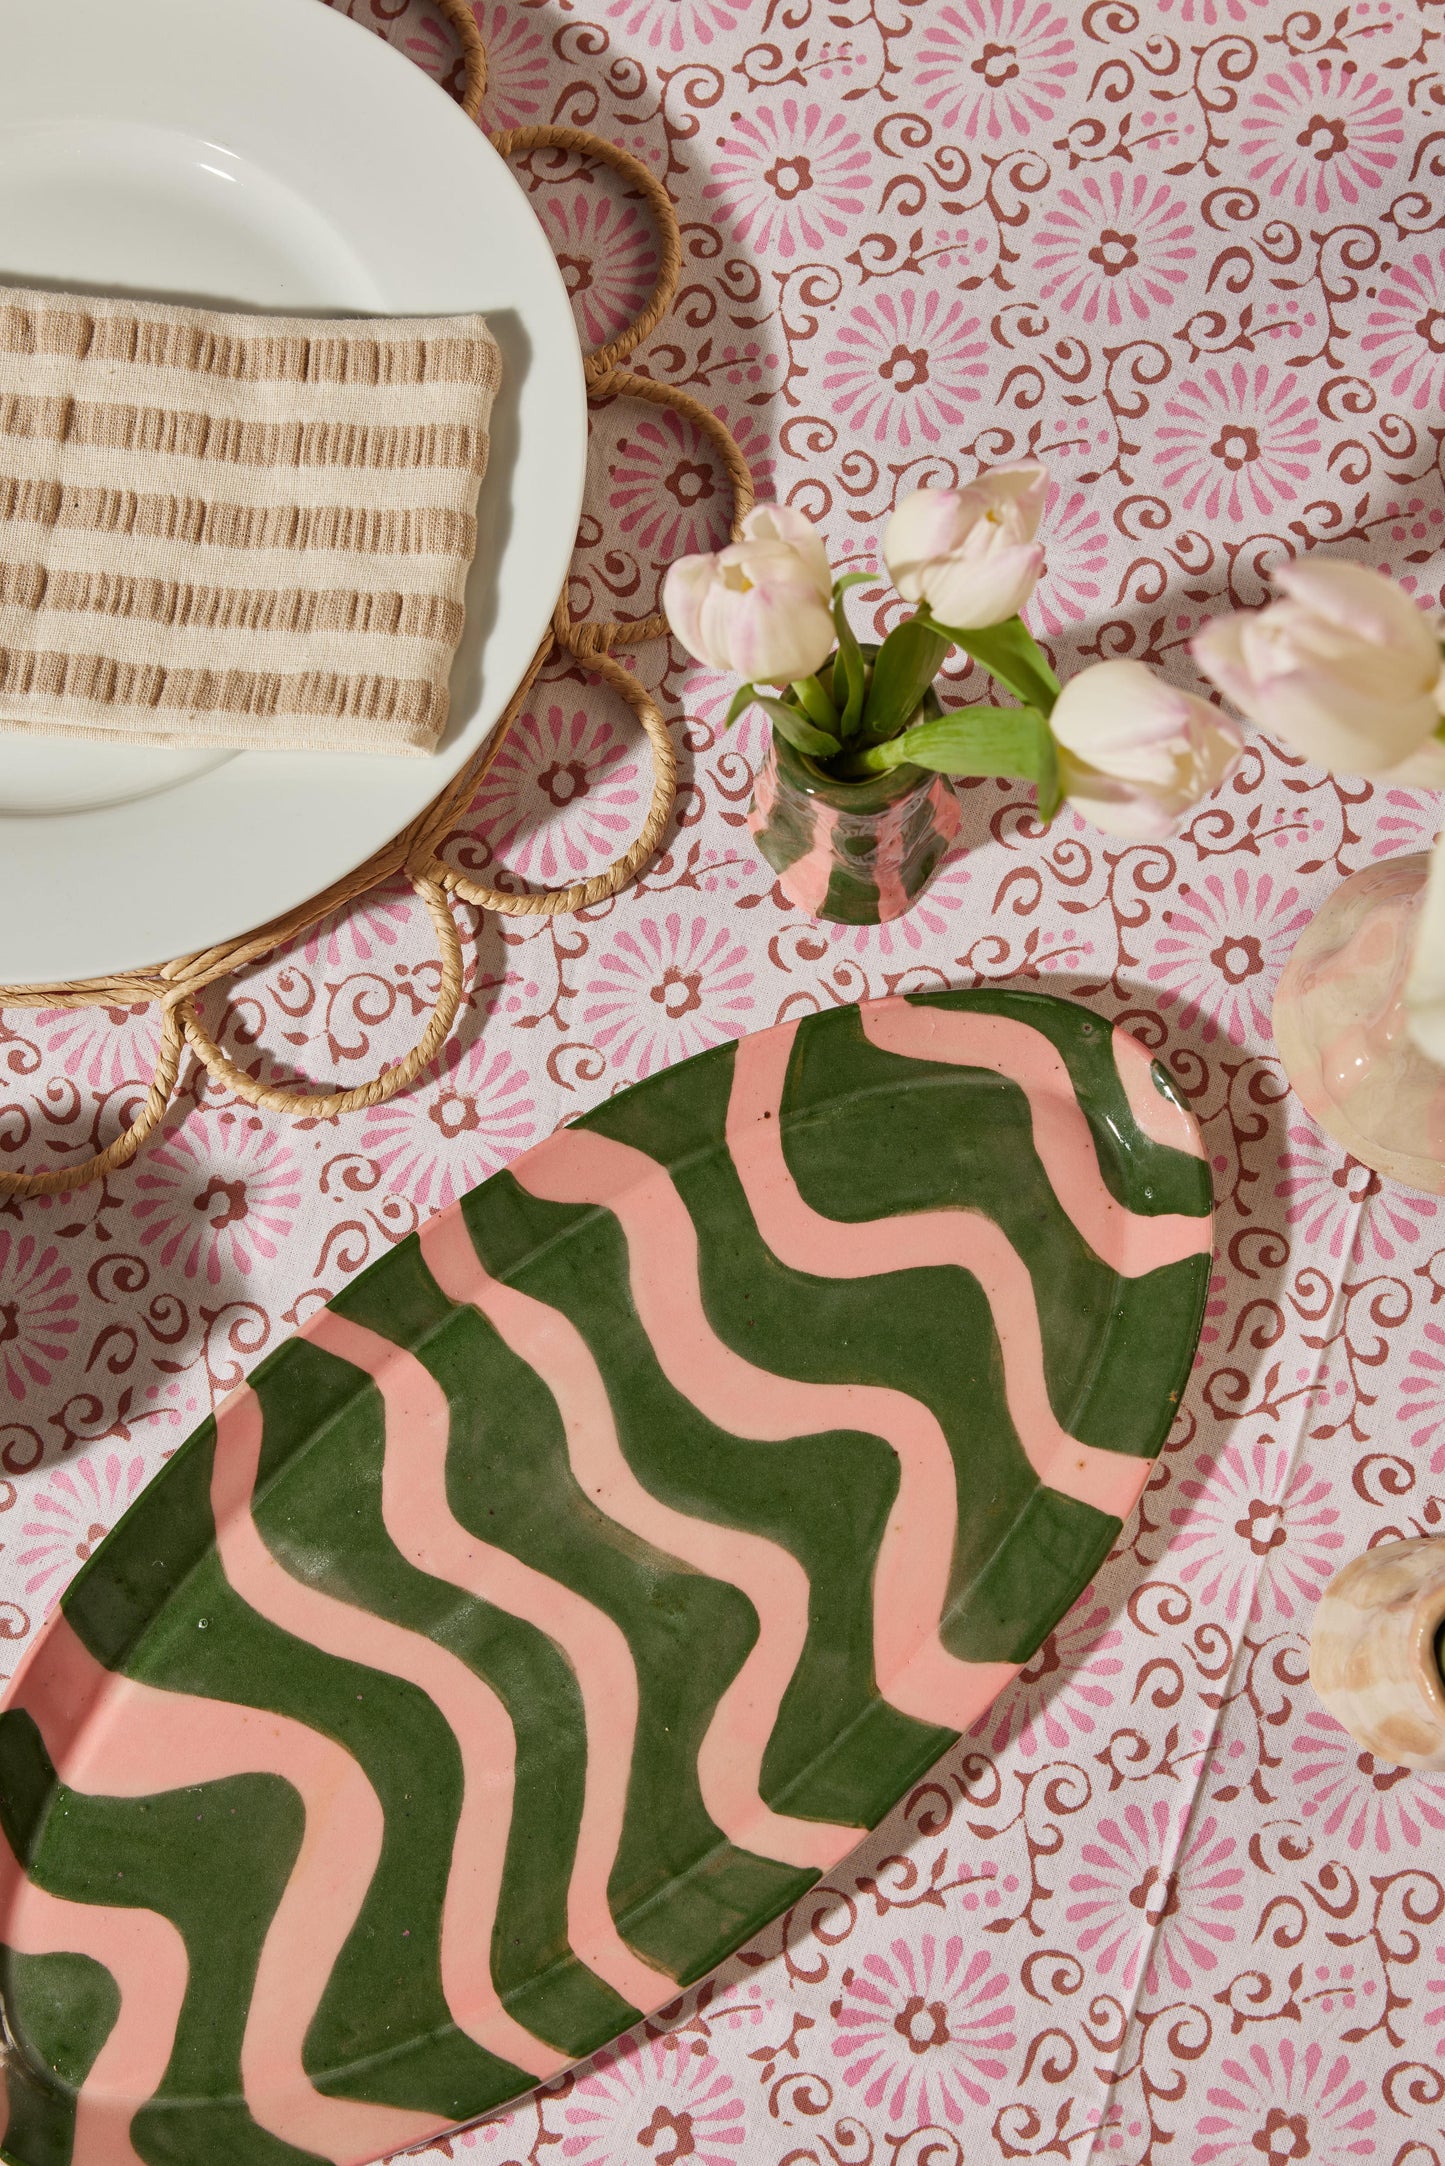 DM x Hodge Pots, 'Pink and Green Striped Platter'